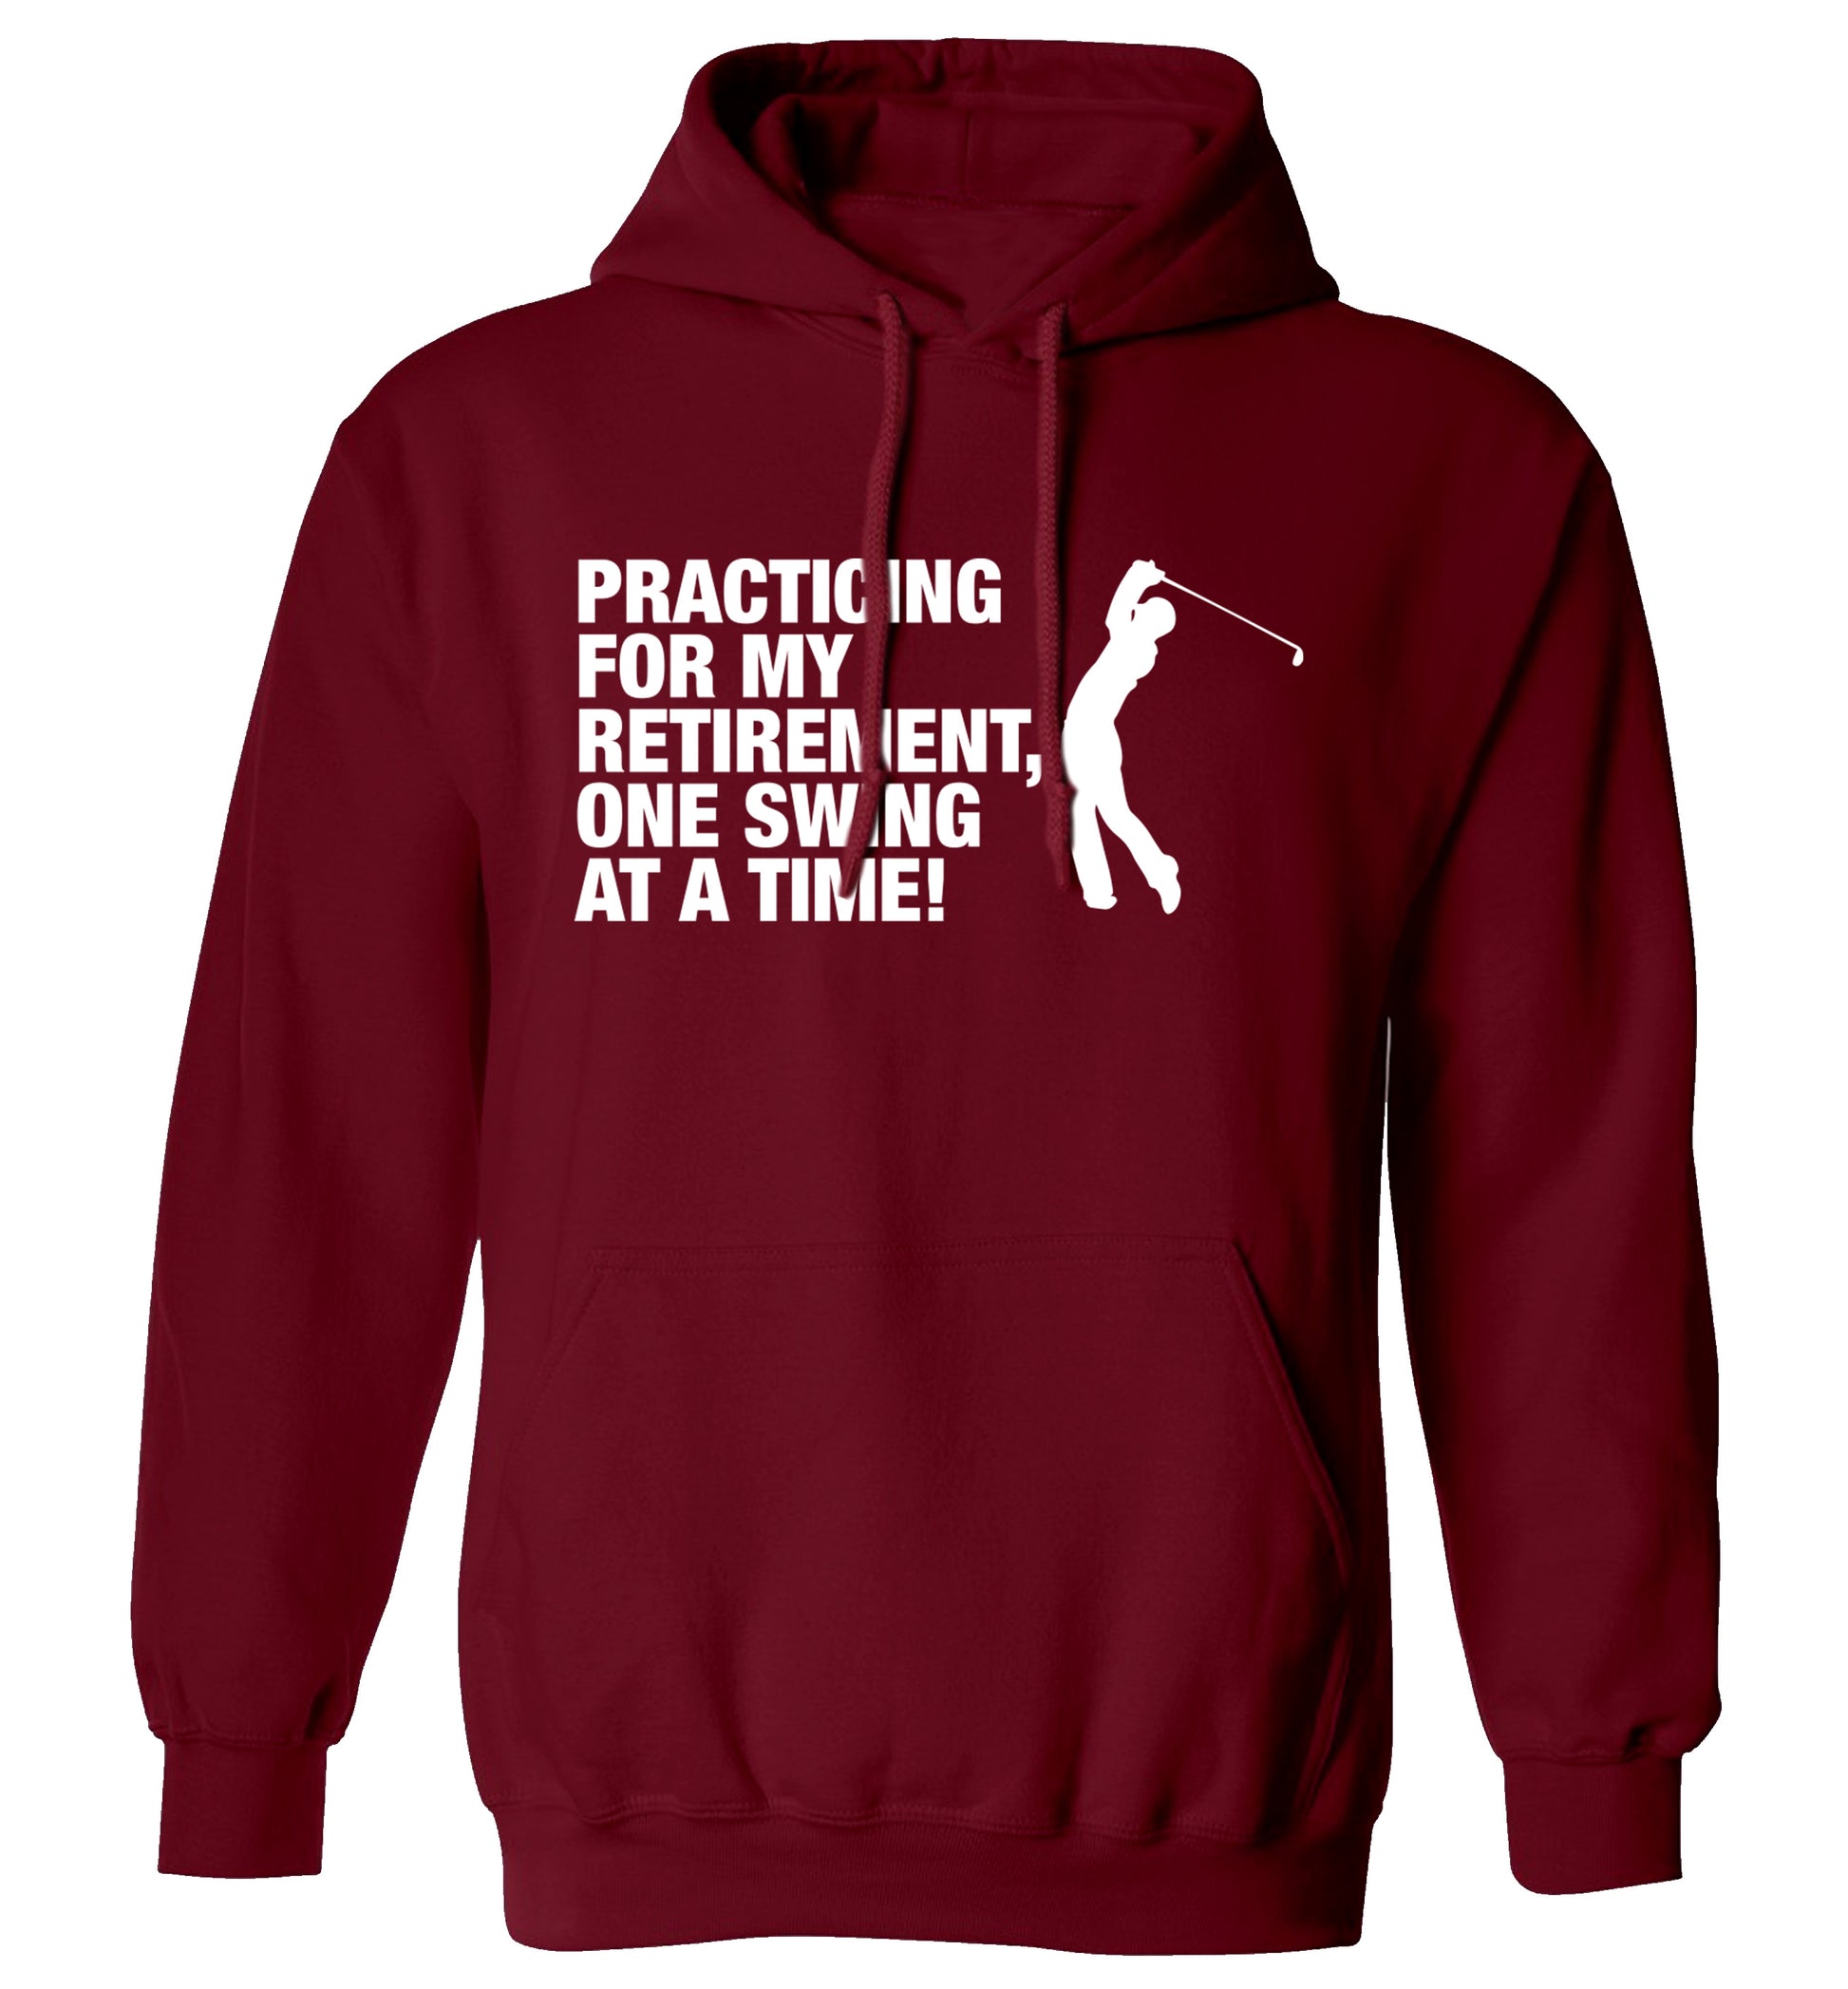 Practicing for my retirement one swing at a time adults unisex maroon hoodie 2XL